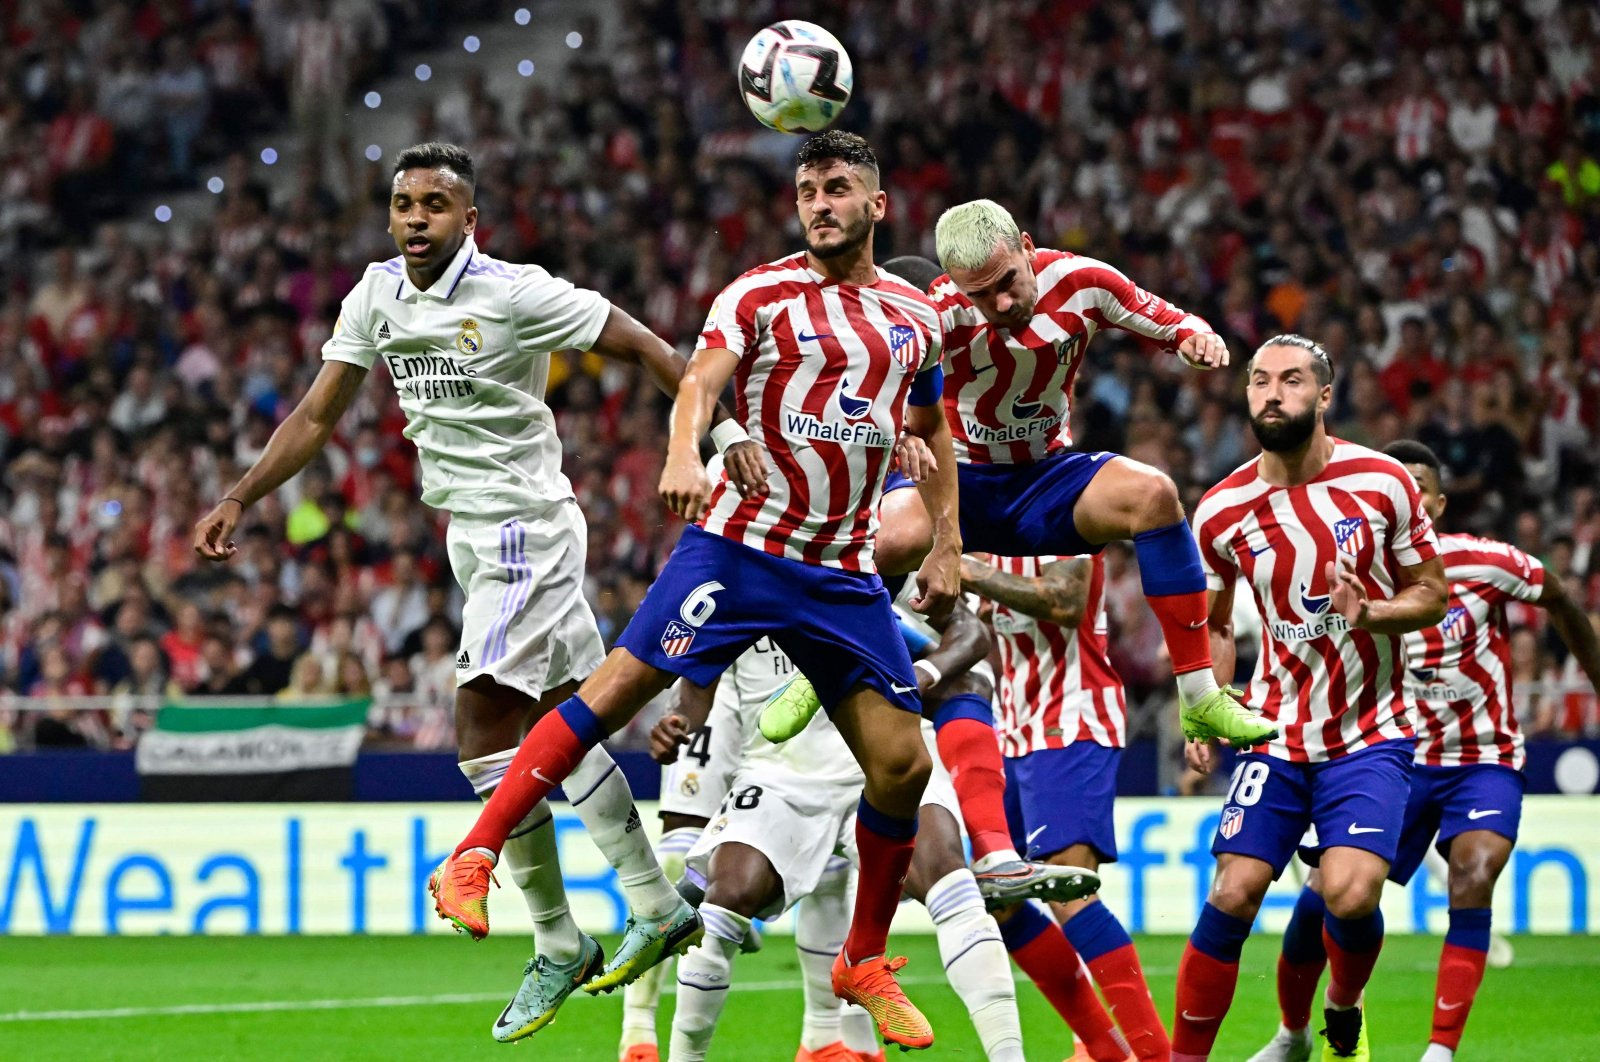 Atletico and Real Madrid players vie for the ball during a La Liga match, Madrid, Spain, Sept. 18, 2022. (AFP Photo)